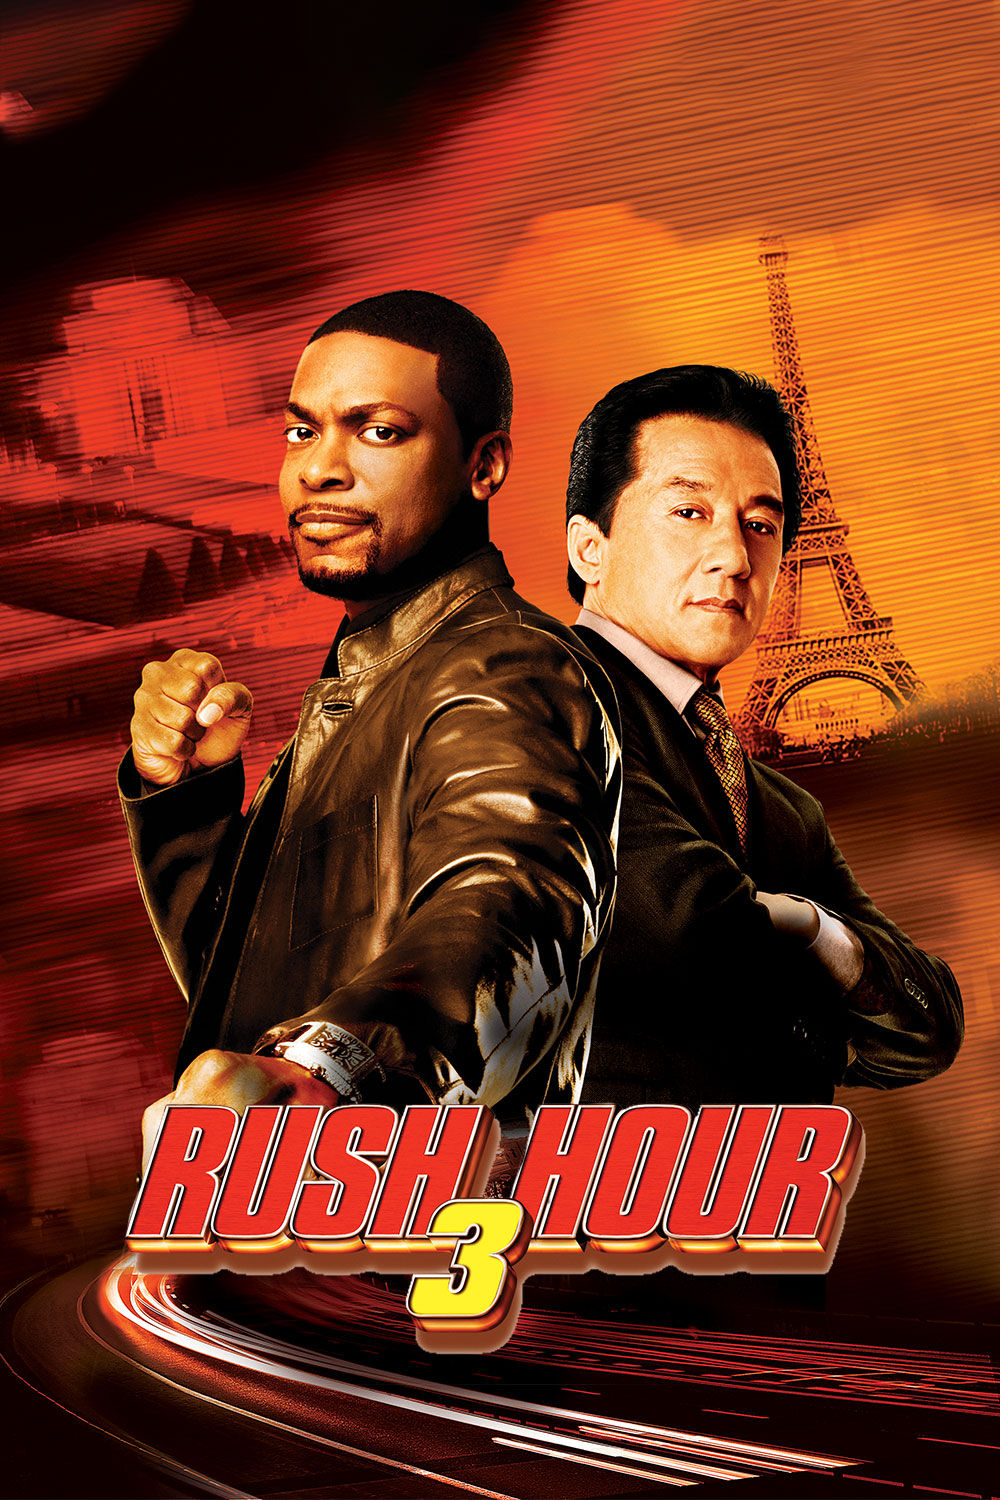 Watch Rush Hour 3 Movie Online in HD | Reviews, Cast & Release Date -  BookMyShow